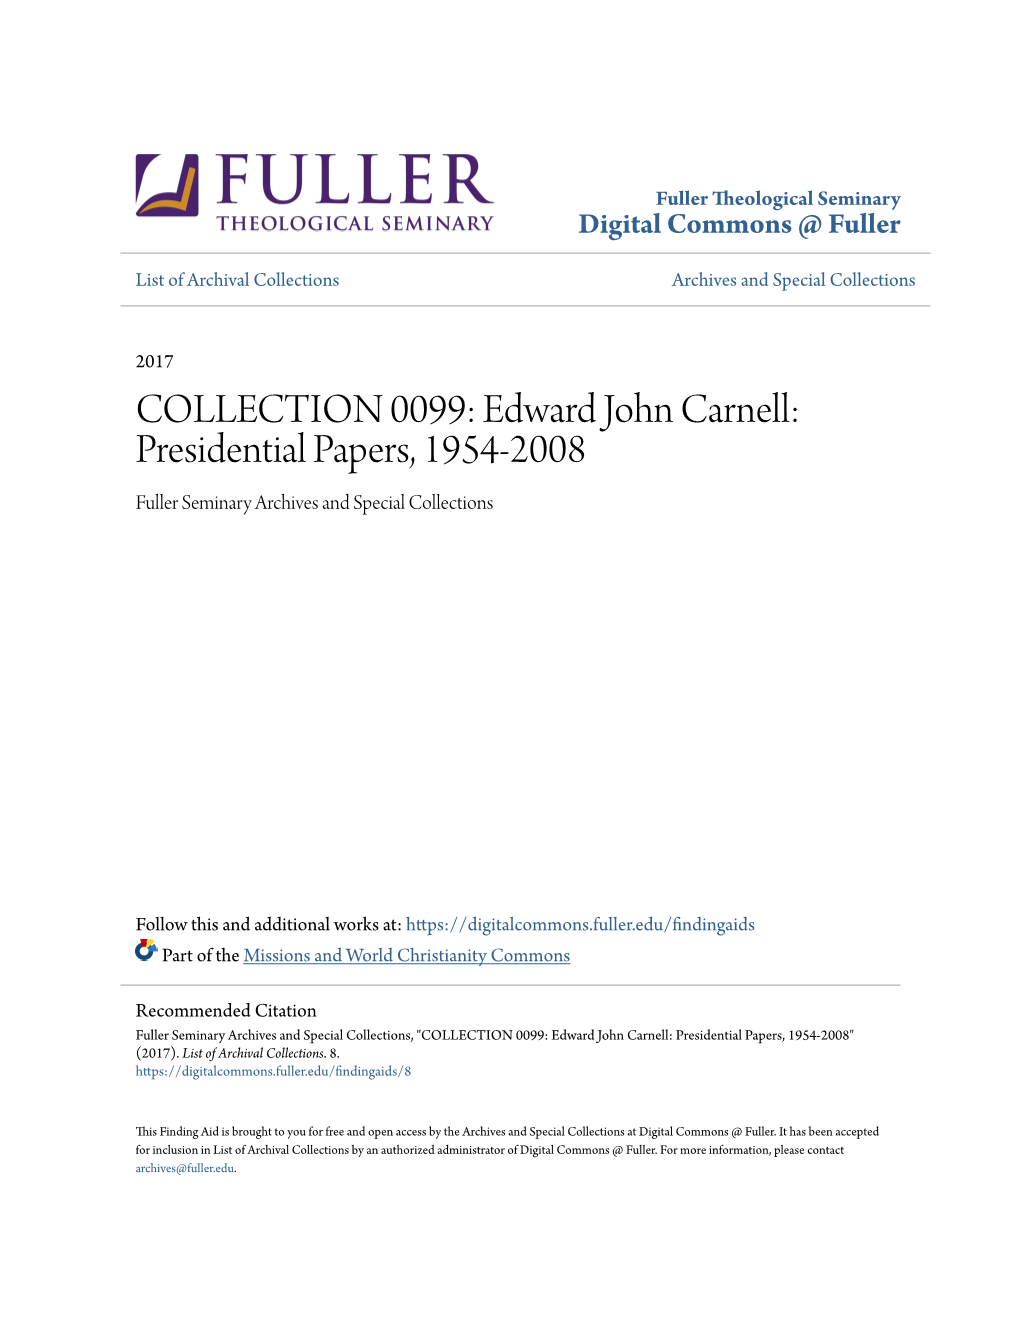 Edward John Carnell: Presidential Papers, 1954-2008 Fuller Seminary Archives and Special Collections